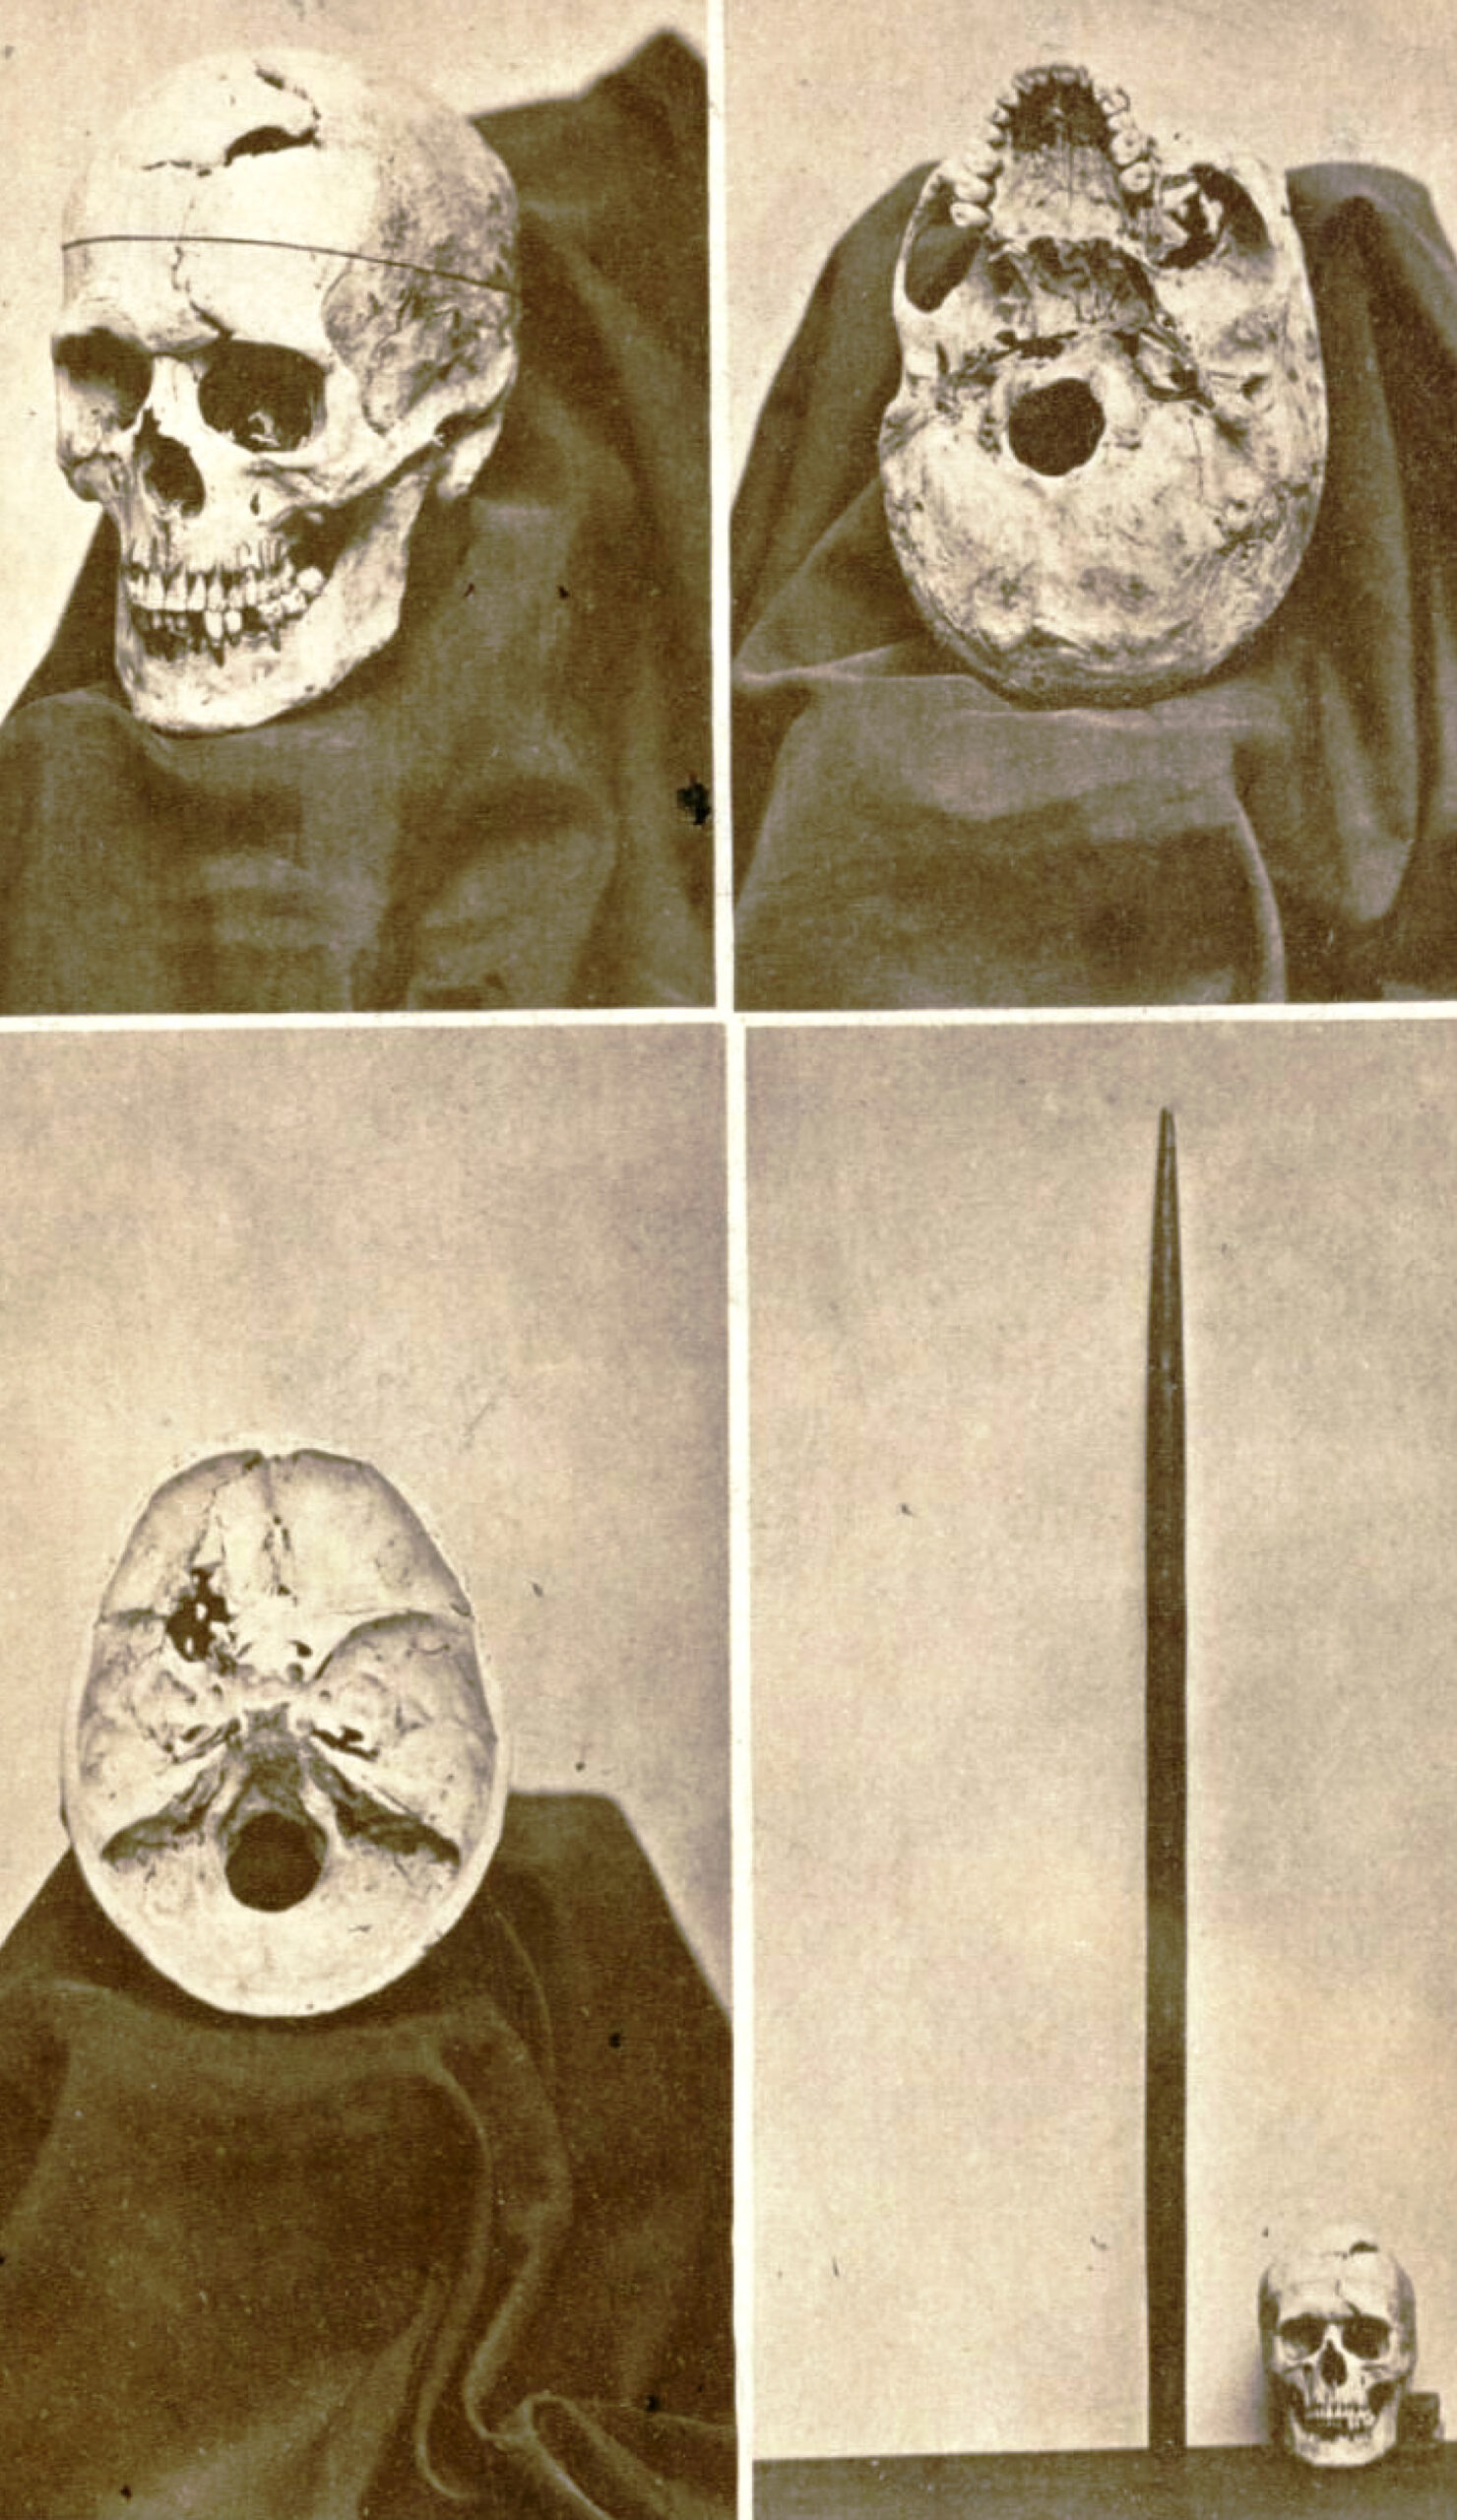 Phineas Gage's skull